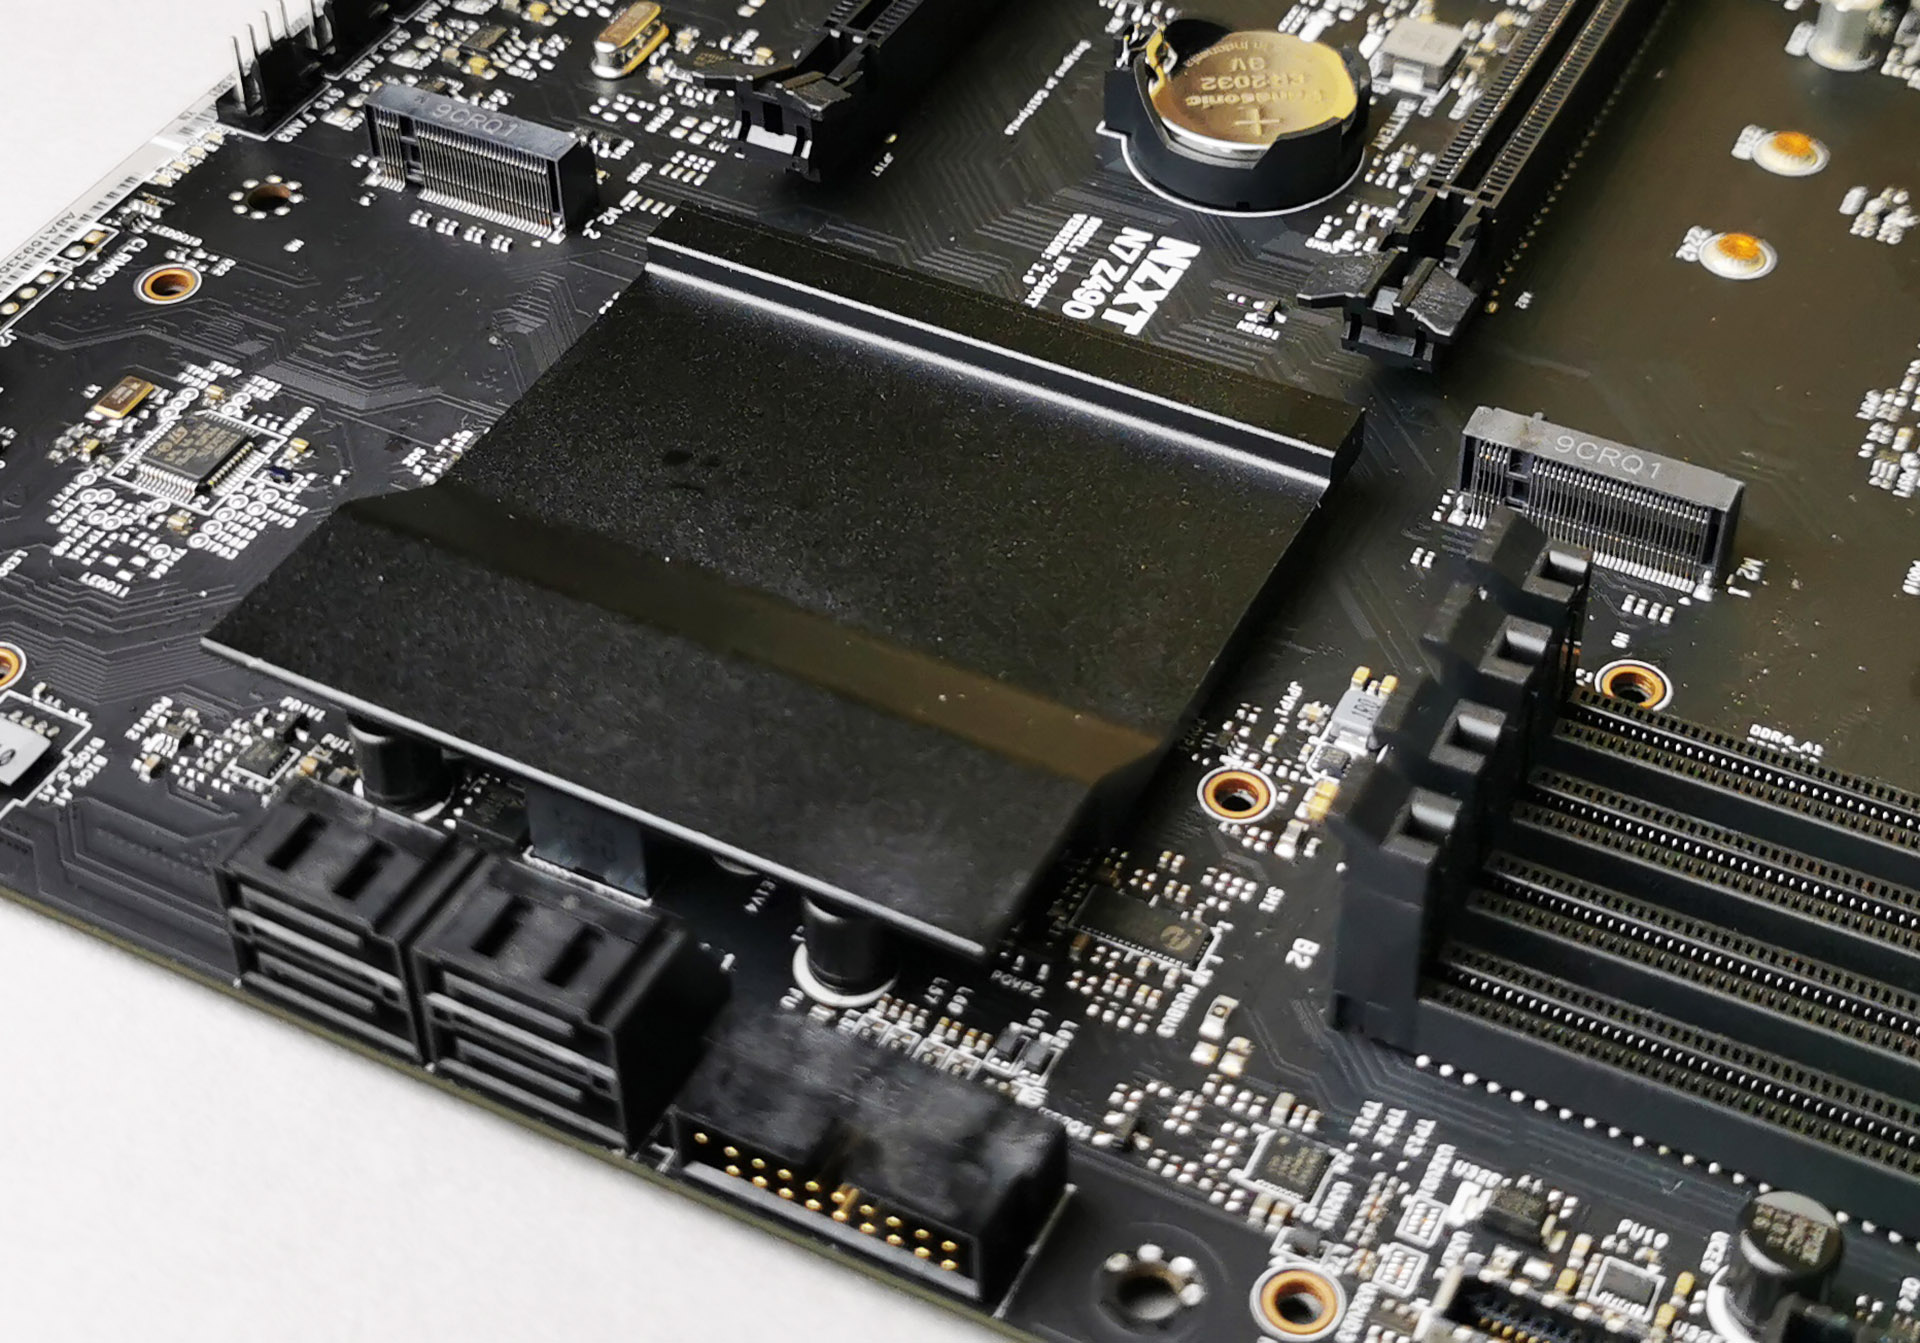 Visual Inspection - The NZXT N7 Z490 Motherboard Review: From A